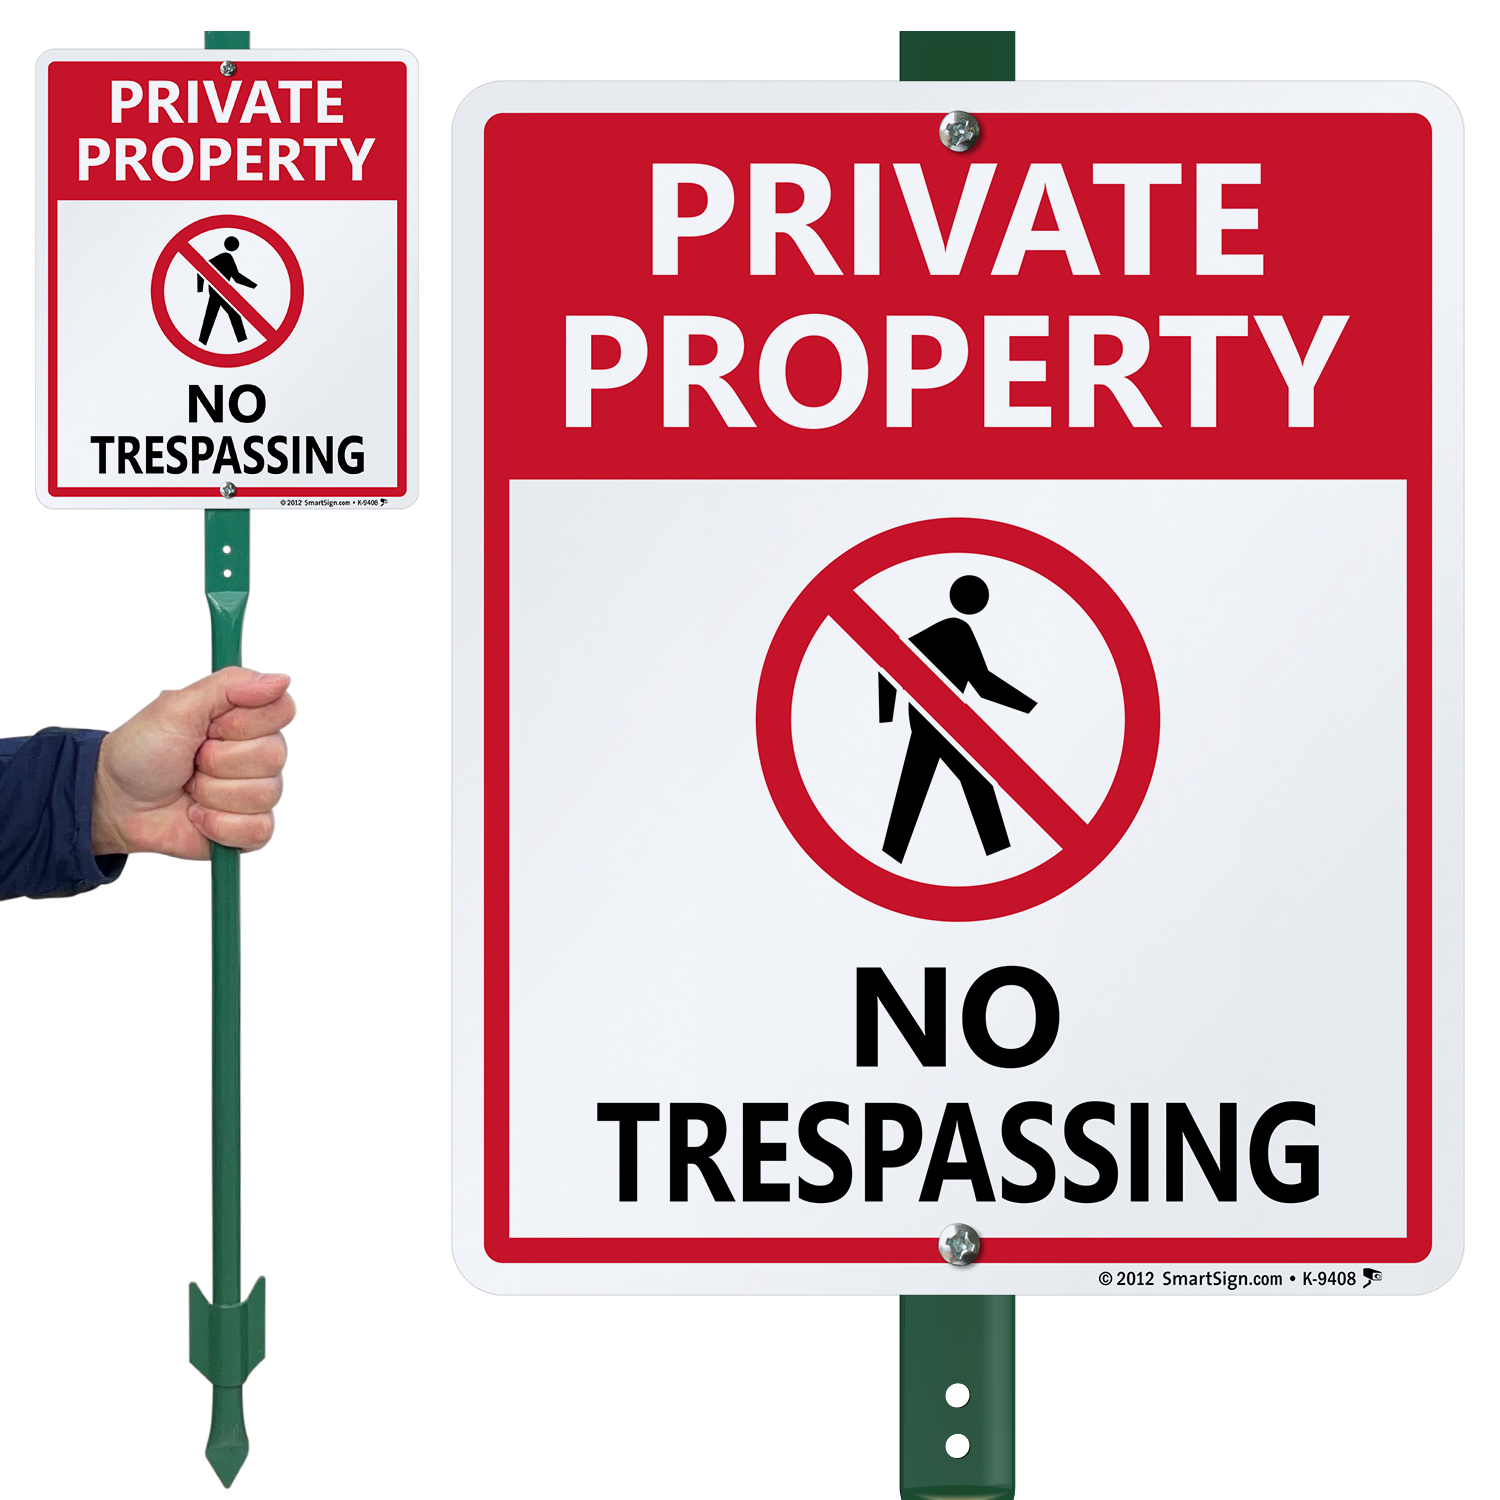 Aluminum 2 Kichwit Private Property No Trespassing Sign 14 Metal Stakes Included 11.8 x 7.9 